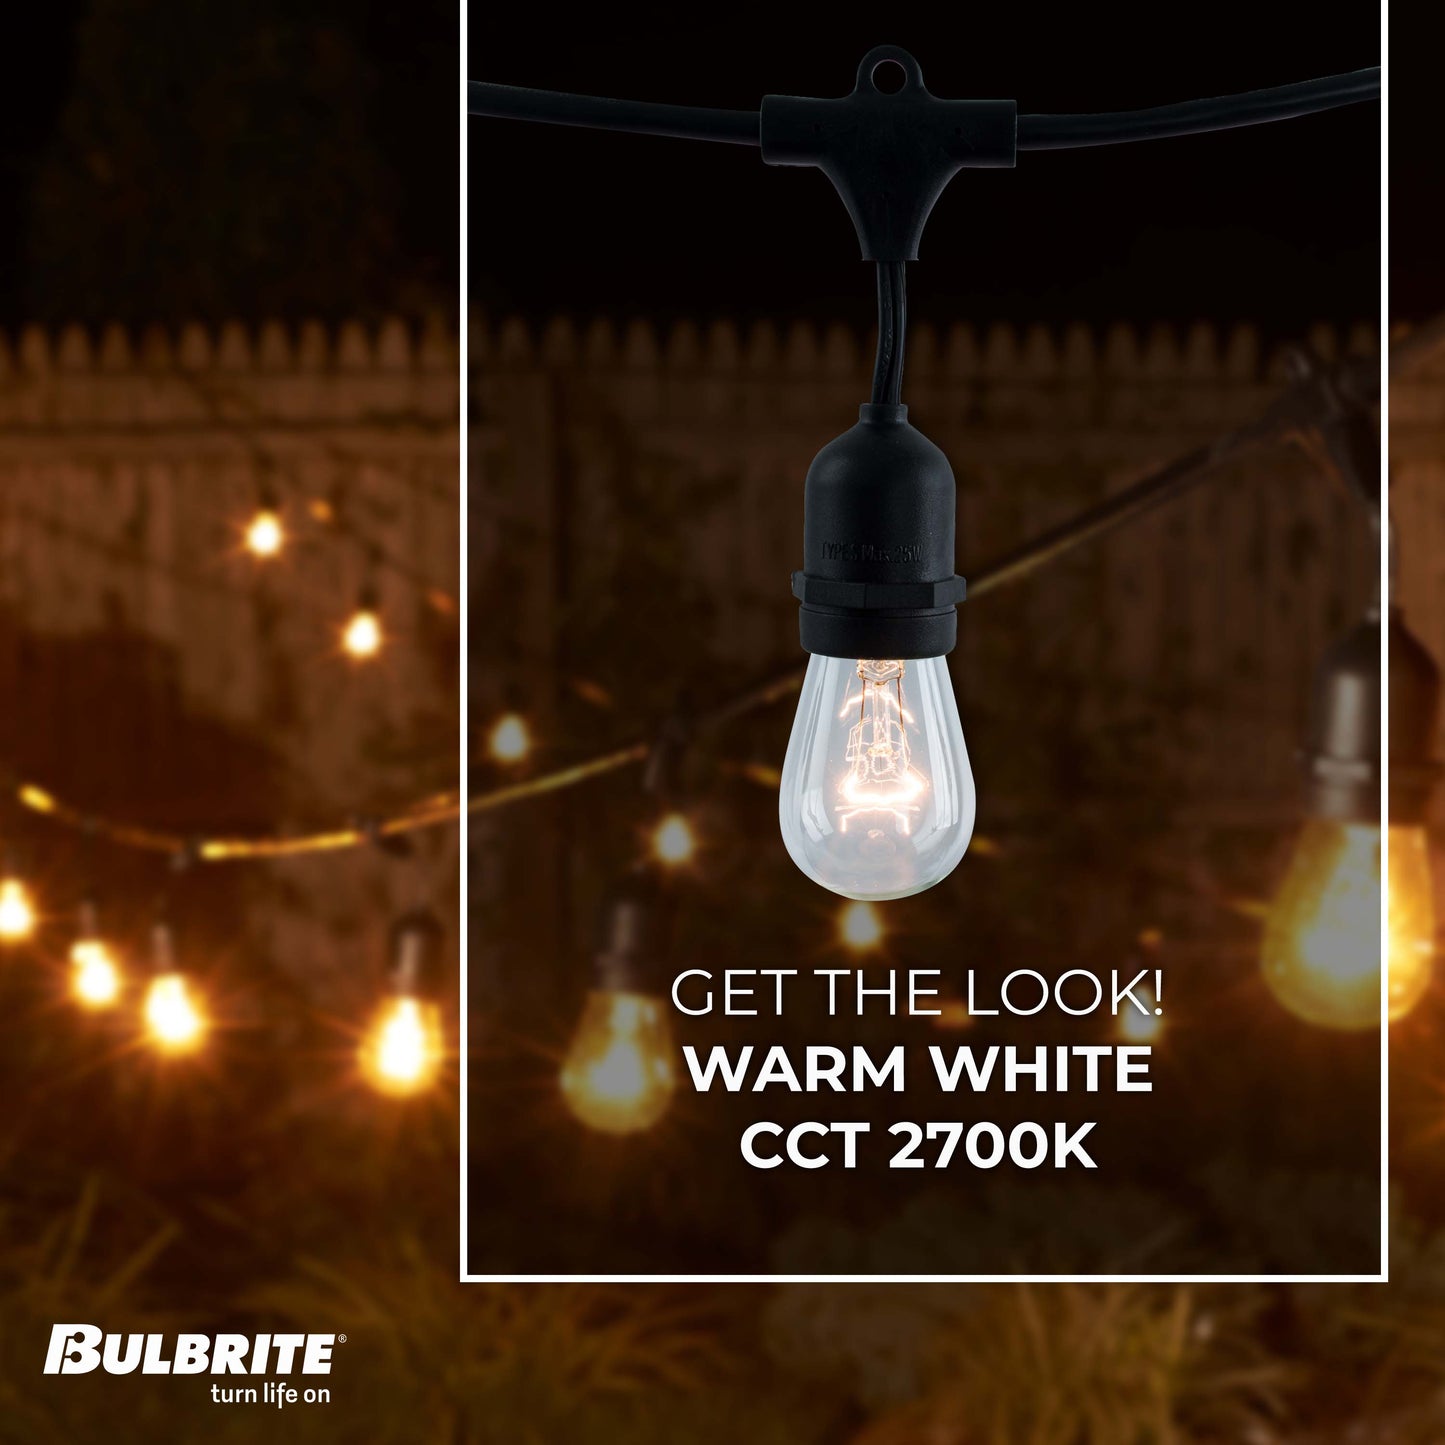 Bulbrite 48-foot String Light Kit with Clear Vintage Style S14 Incandescent Light Bulbs